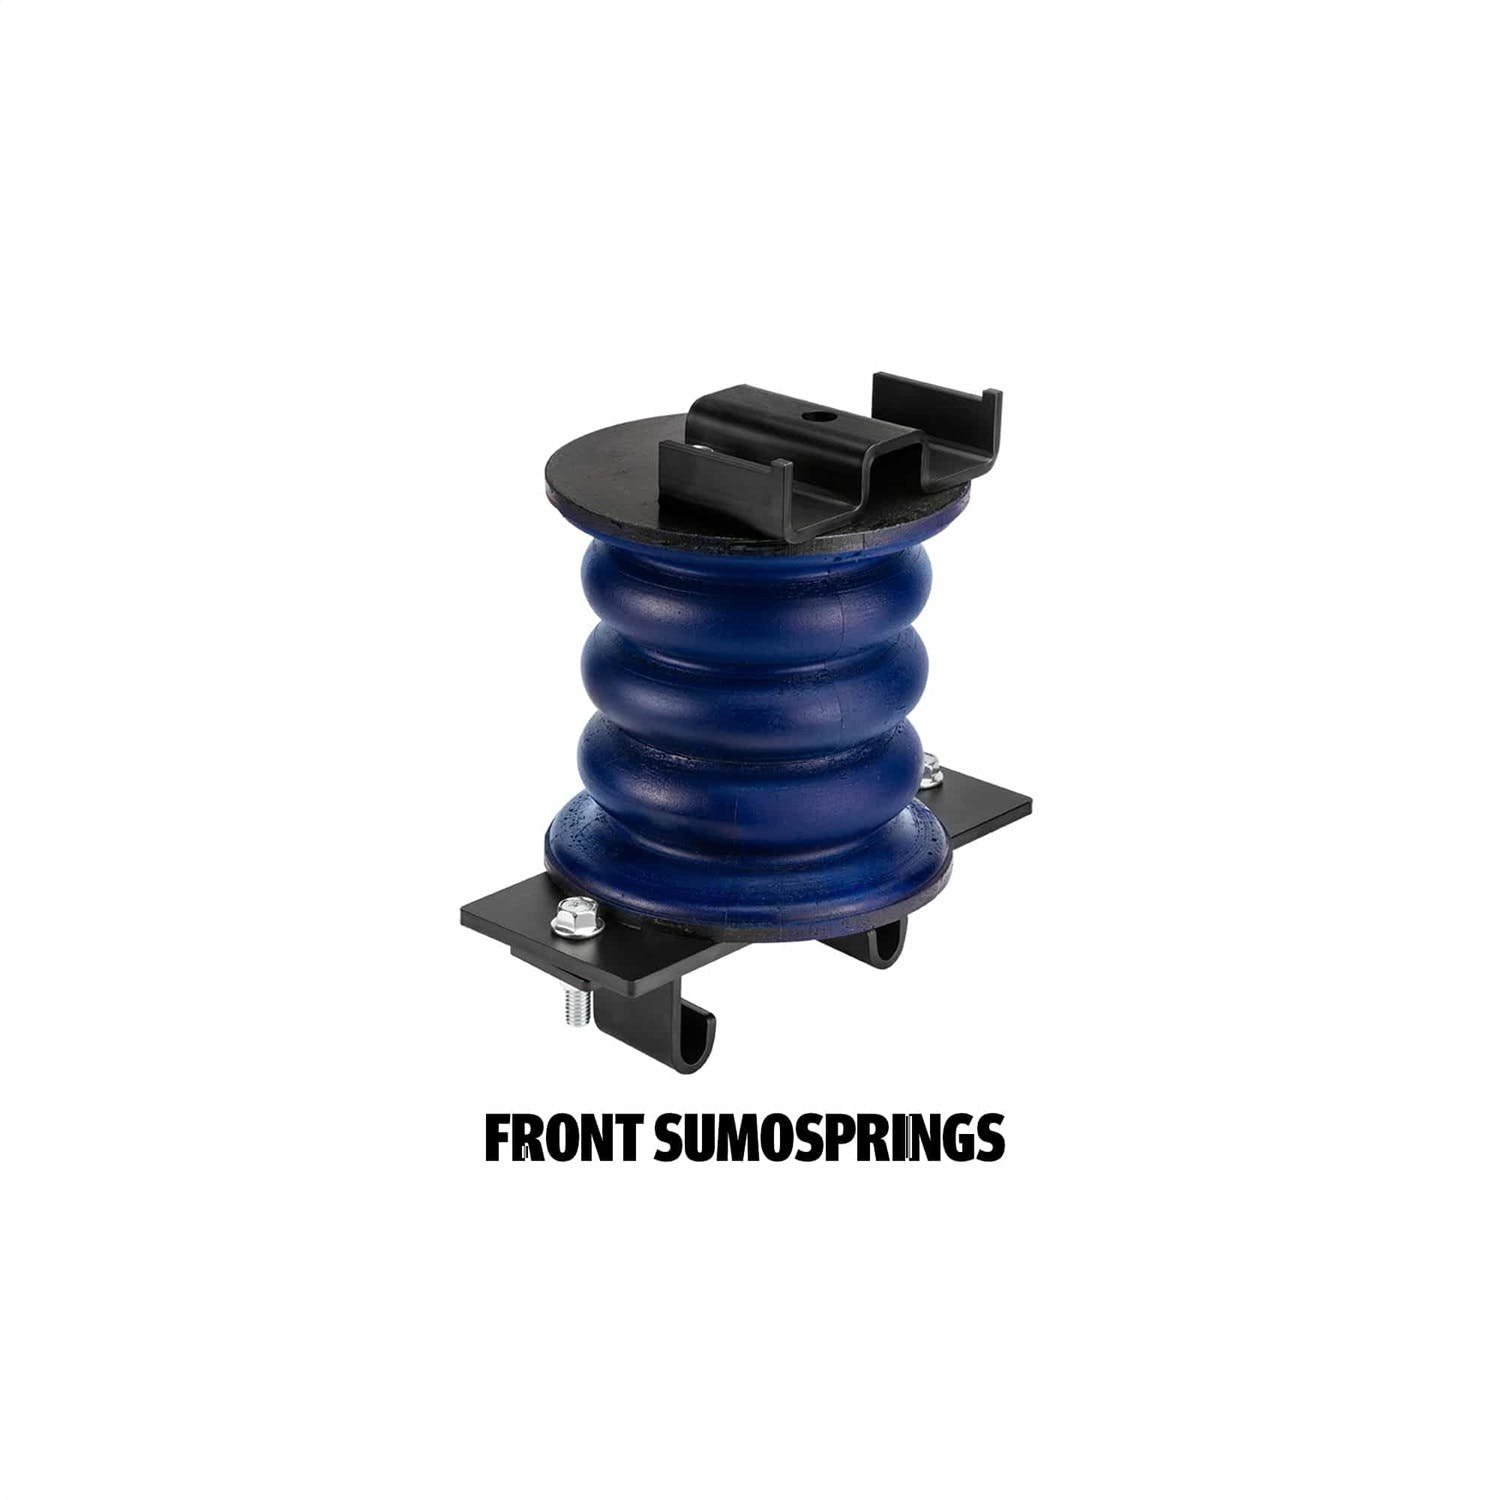 SuperSprings K-10-004 SumoSprings Front and Rear Kits are one-piece units attached on each side